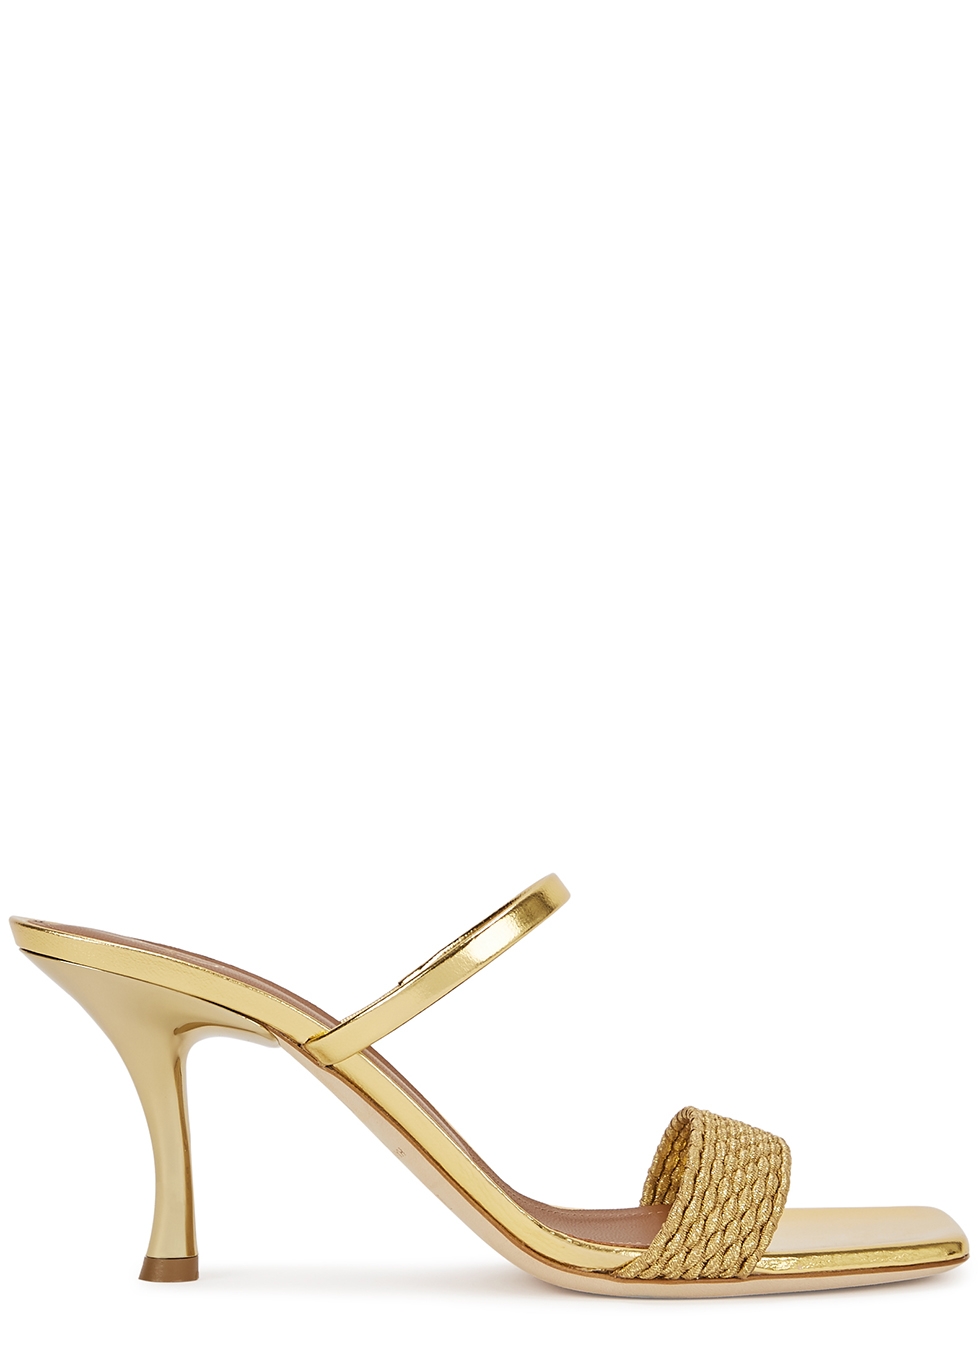 Malone Souliers Frida 70 Gold Leather Mules